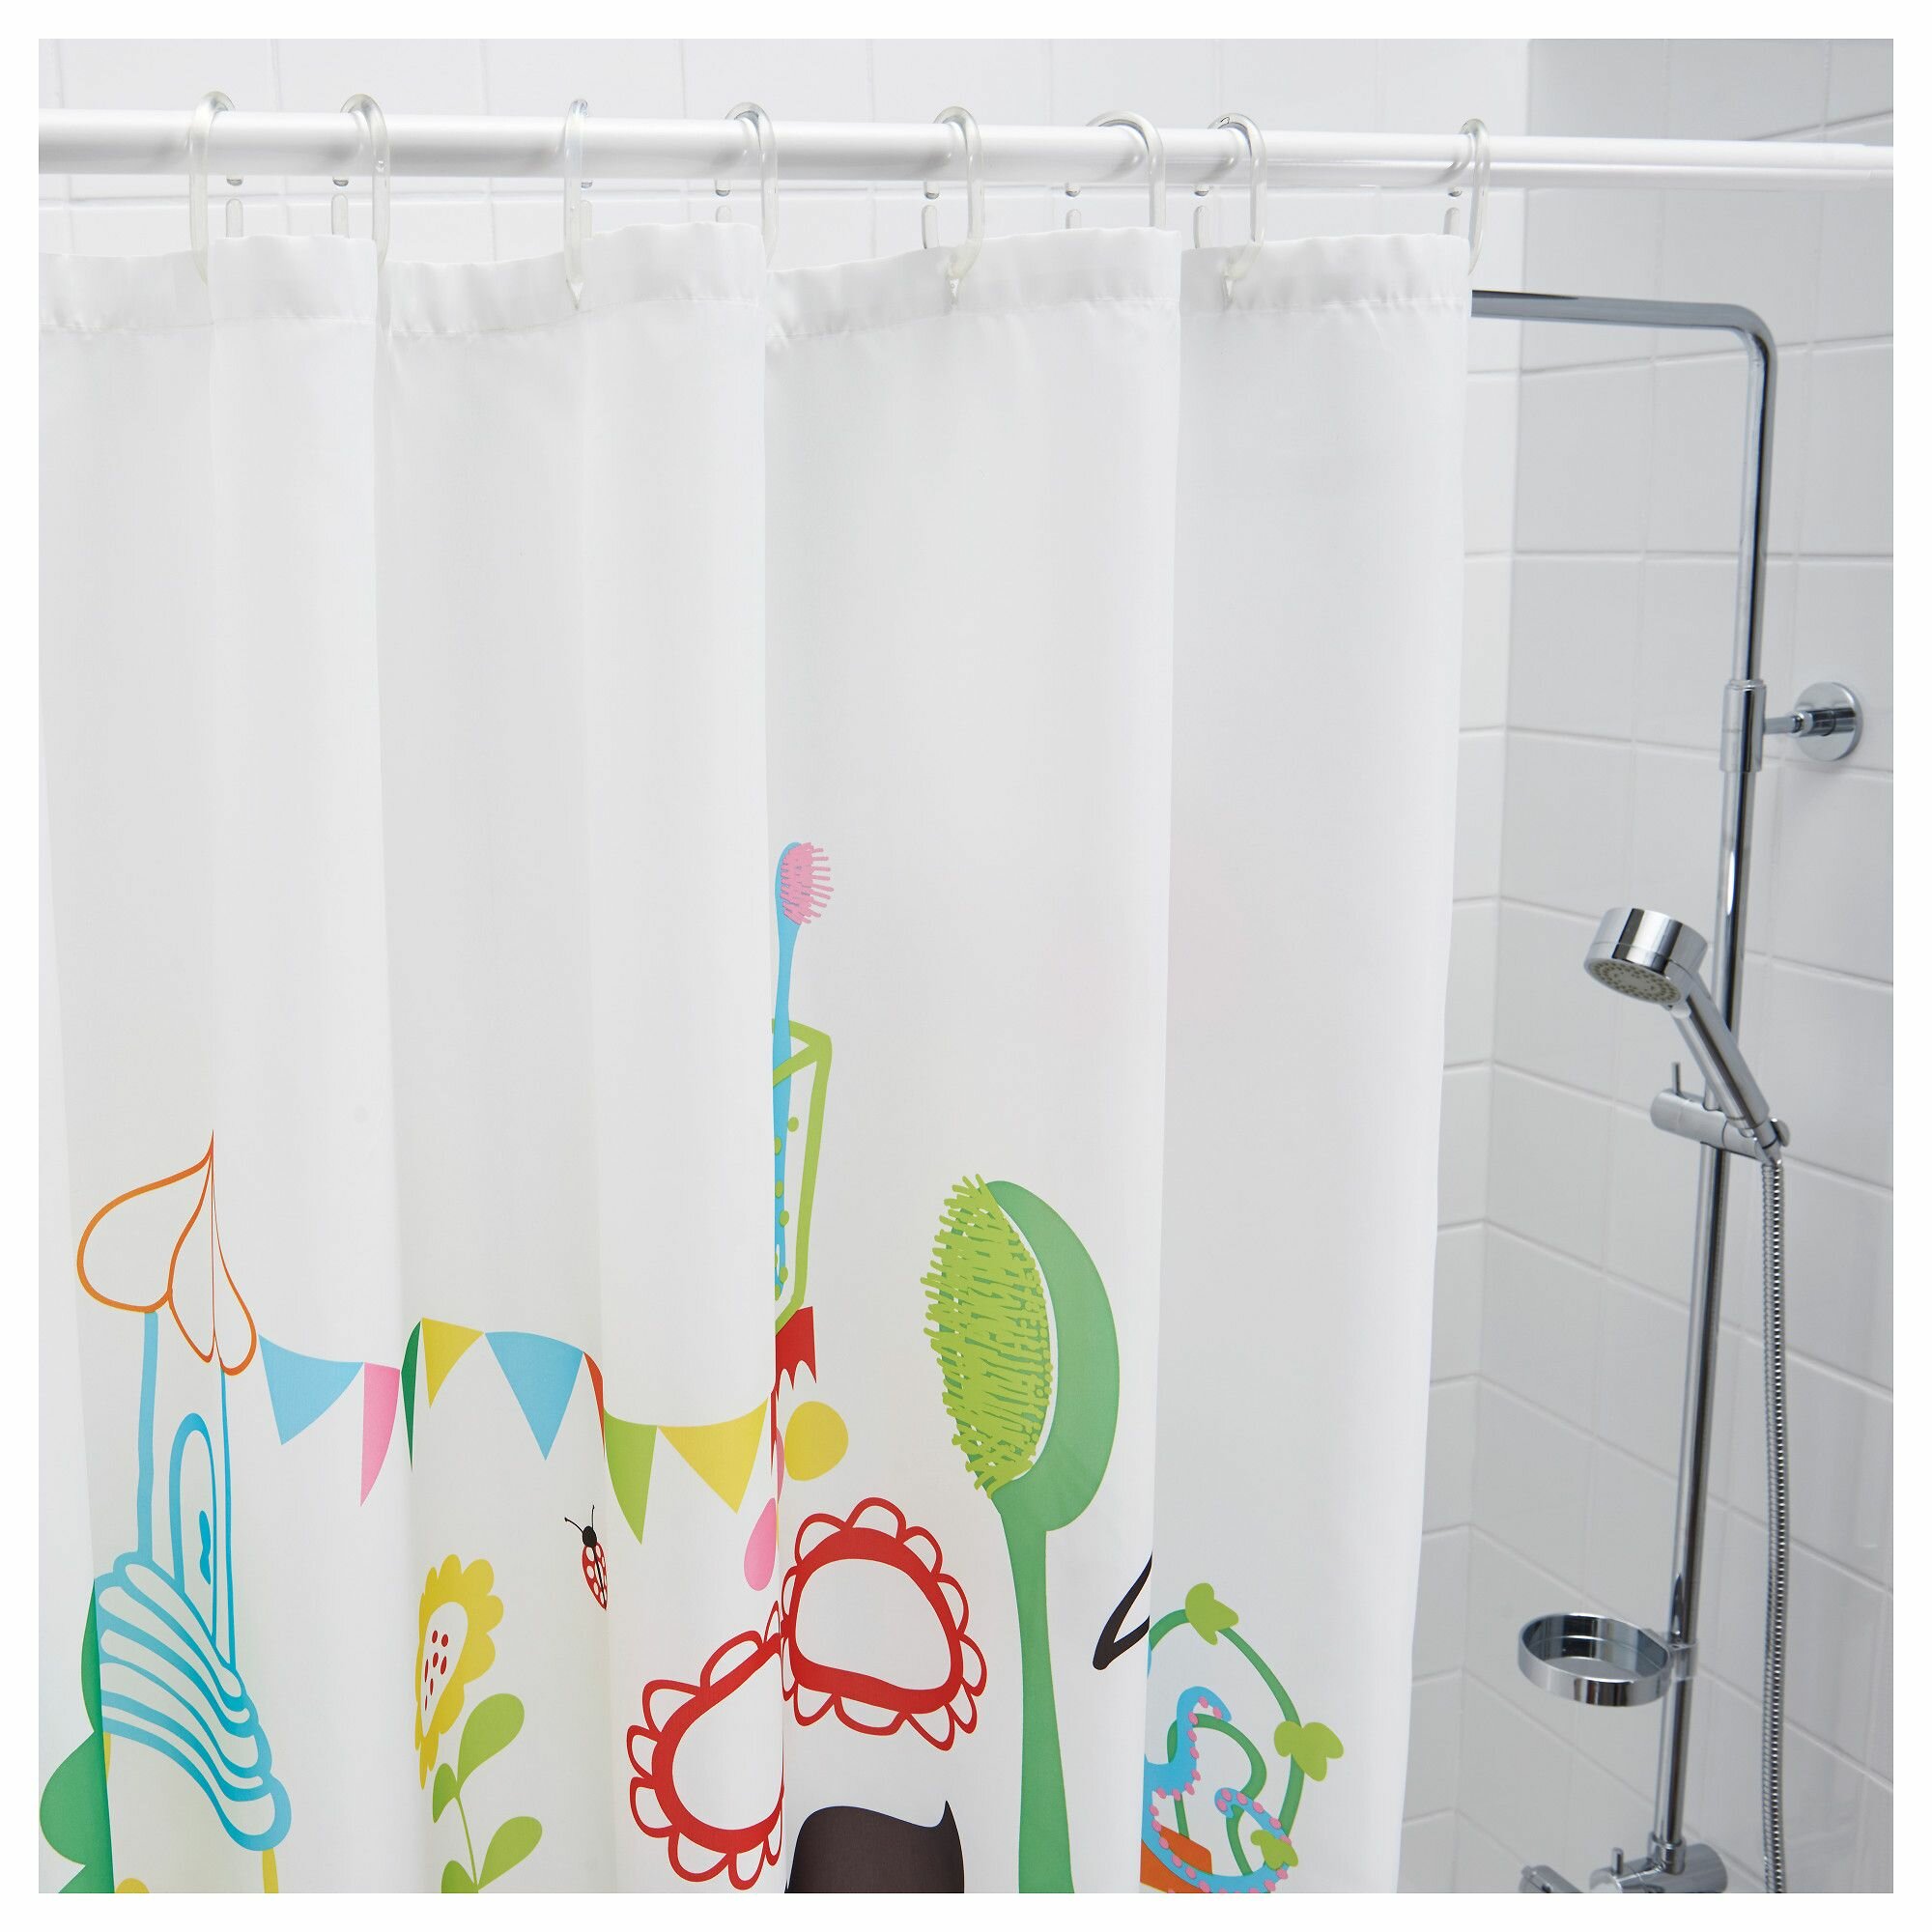 Ikea Shower Curtain for Best Your Bathroom Decoration: Tvingen Shower Curtain | Ikea Shower Curtain | Shower Curtain Rails Ikea